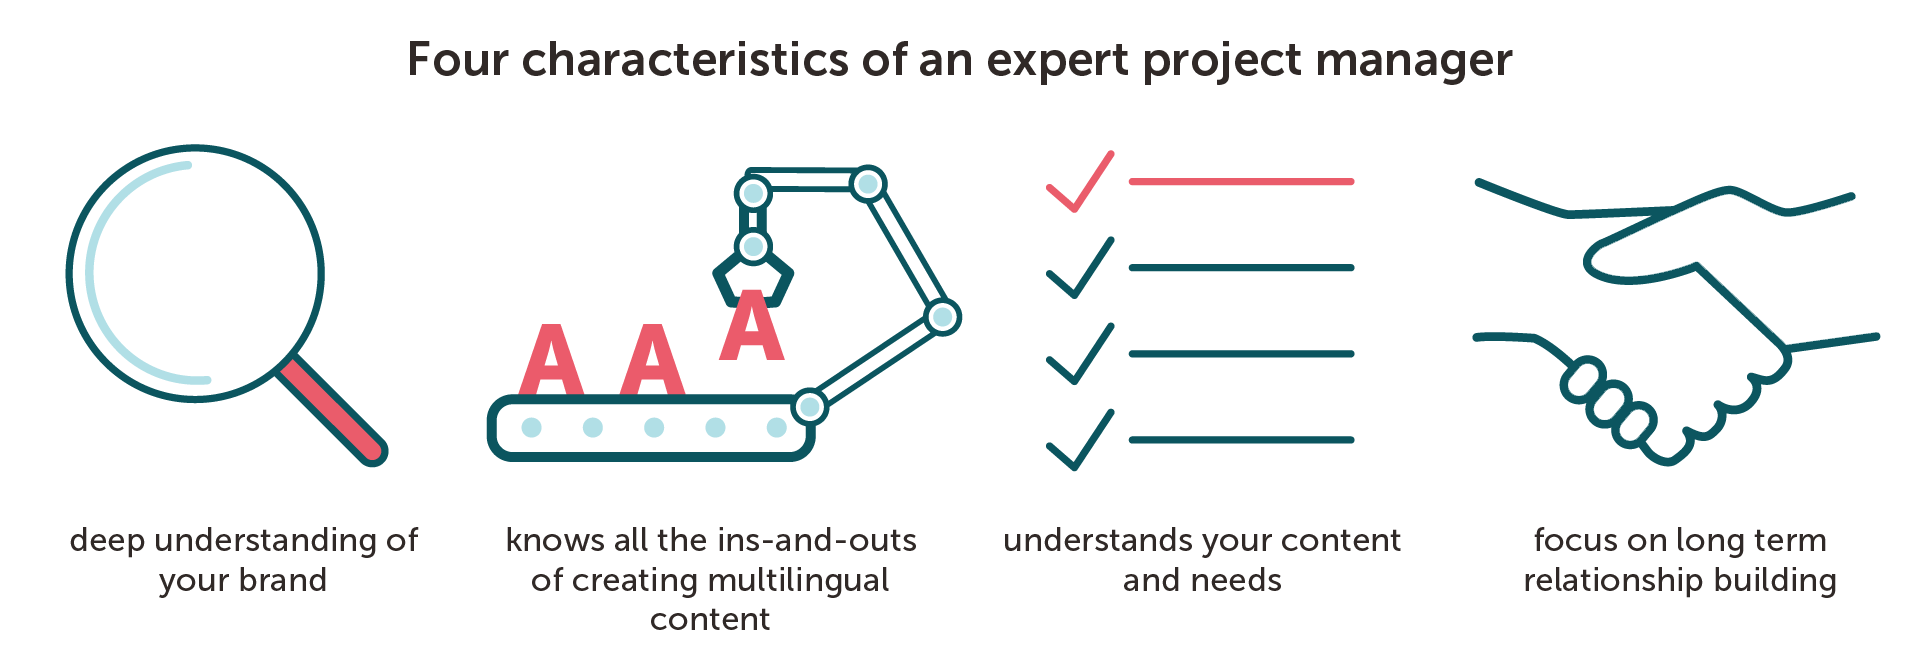 Characteristics of an expert project manager